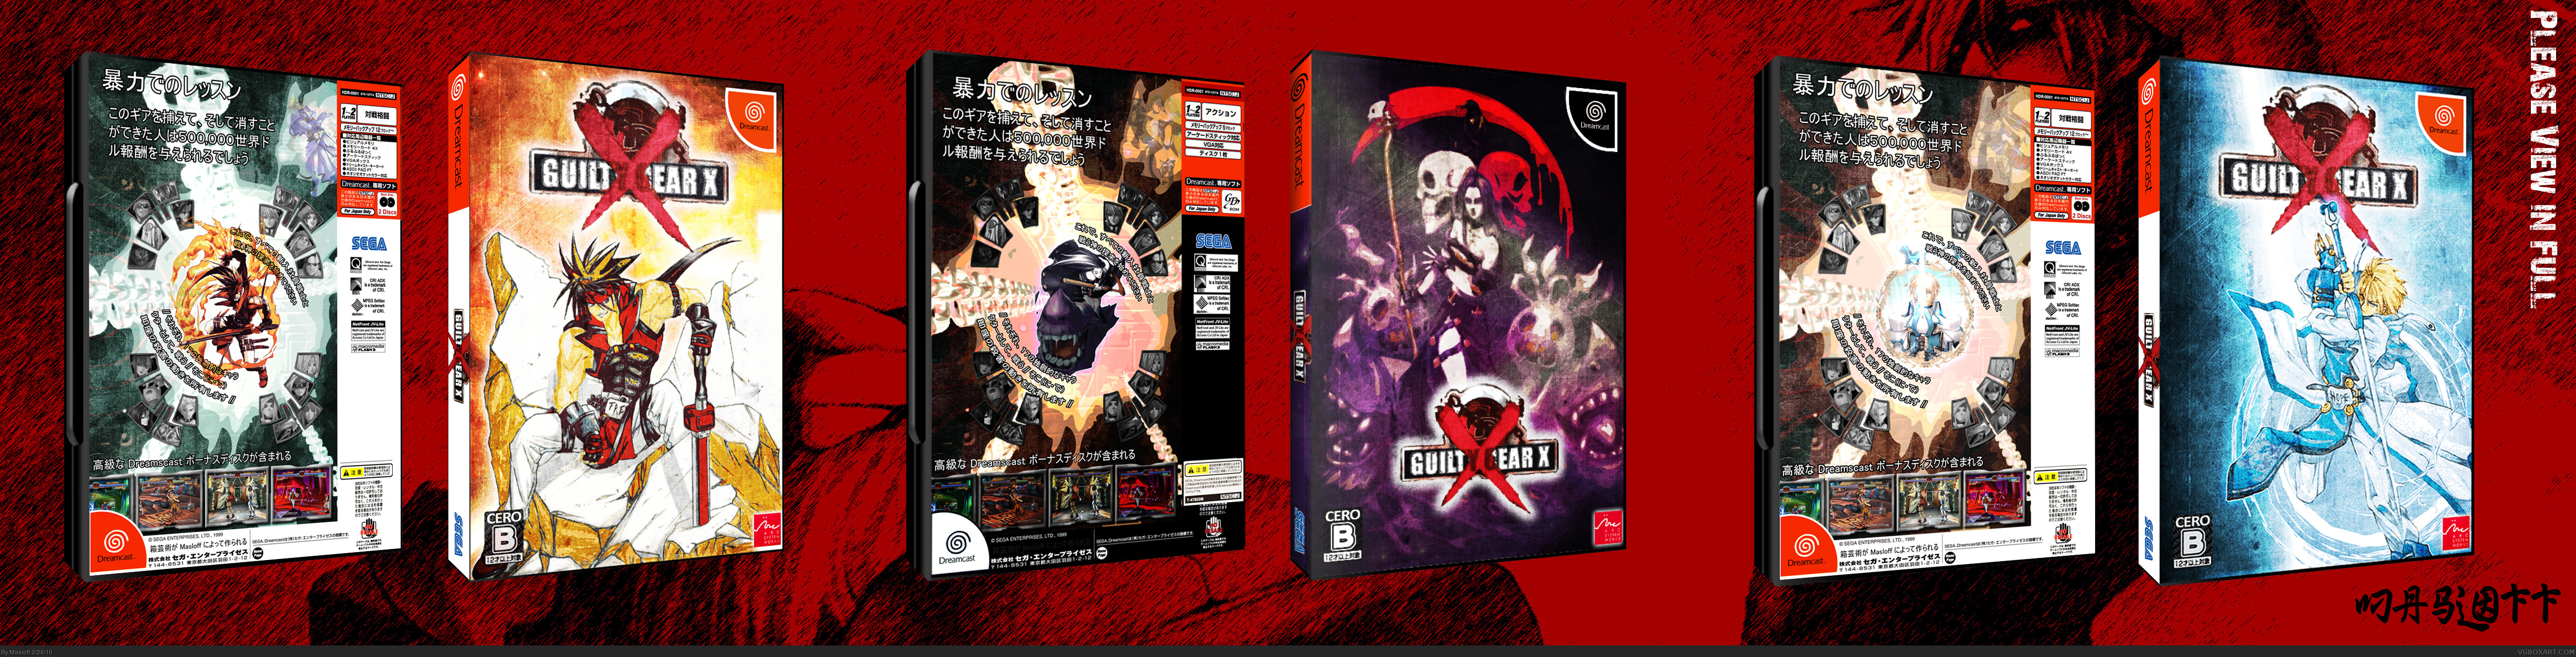 Viewing full size Guilty Gear X box cover